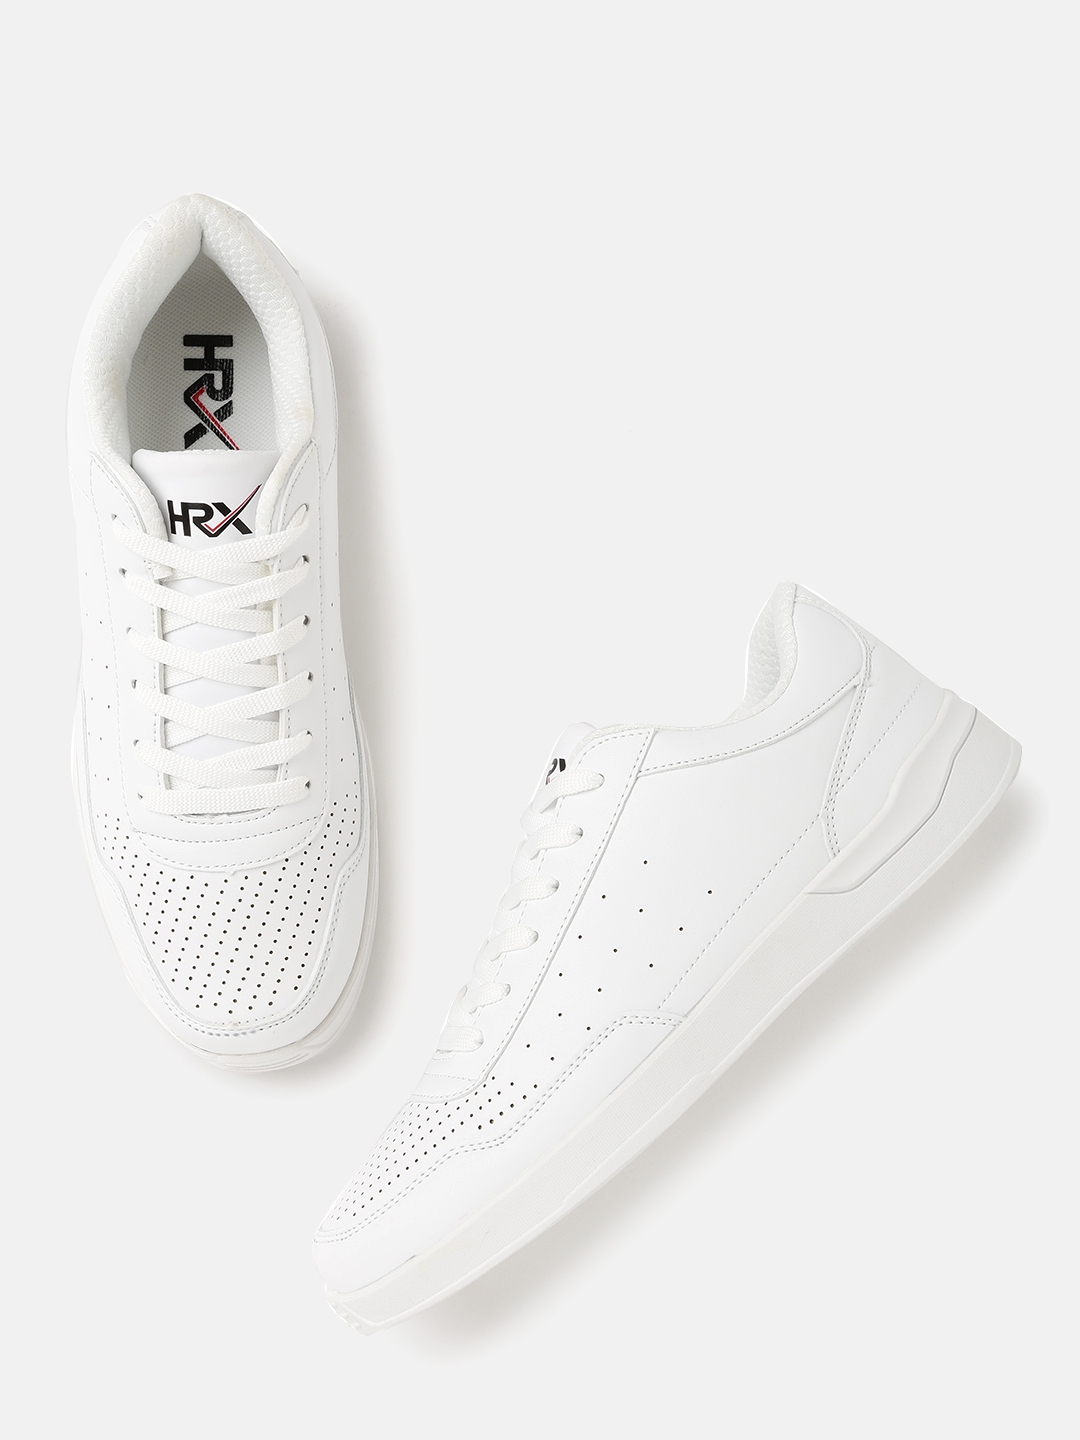 hrx shoes white sneakers